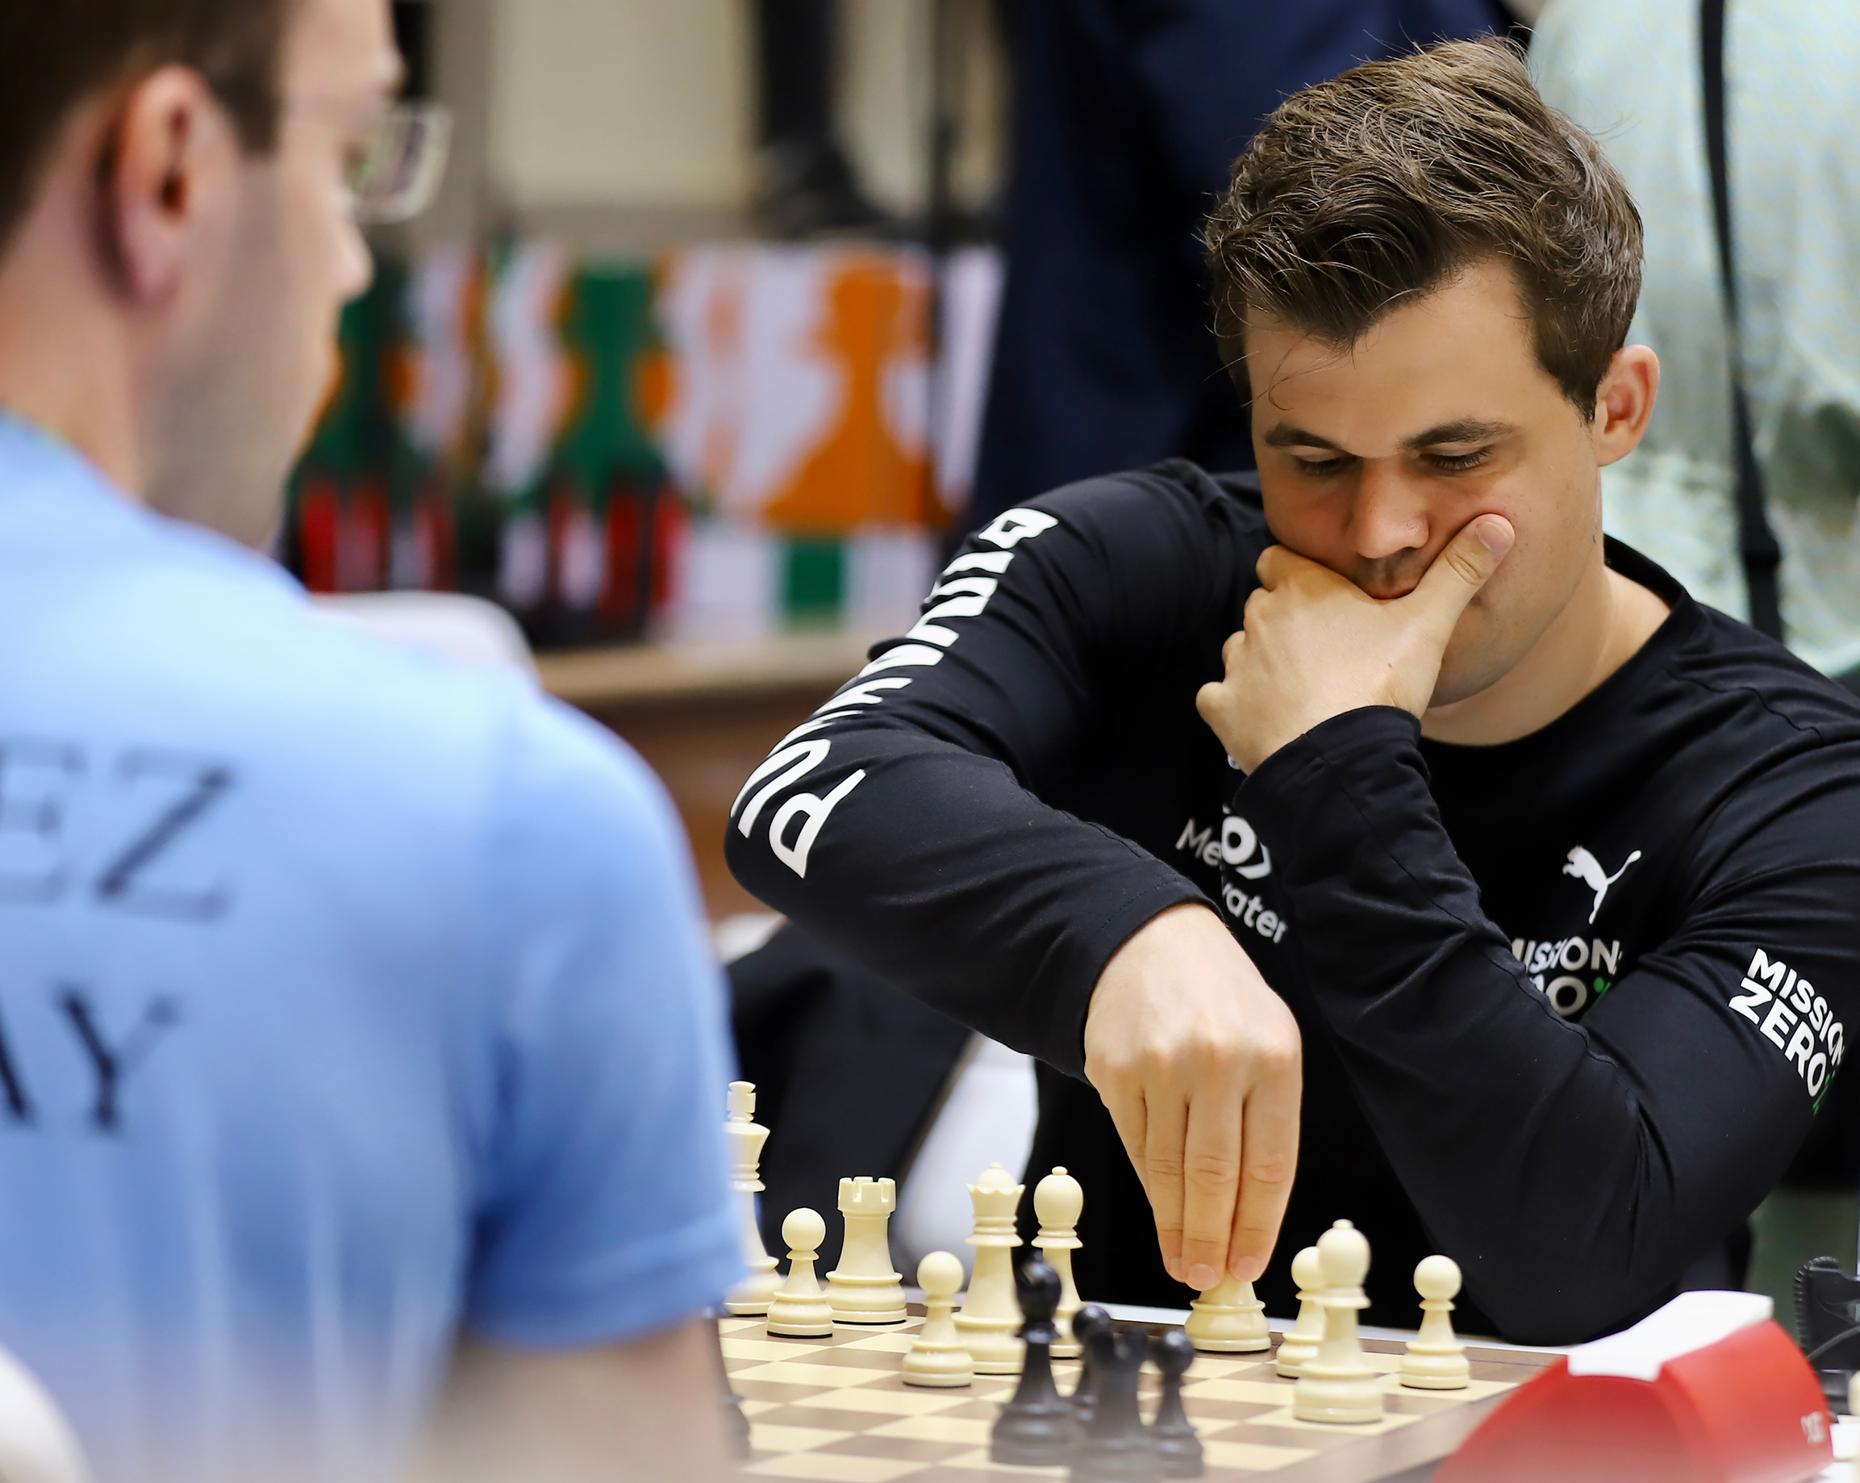 The Week in Chess 1483